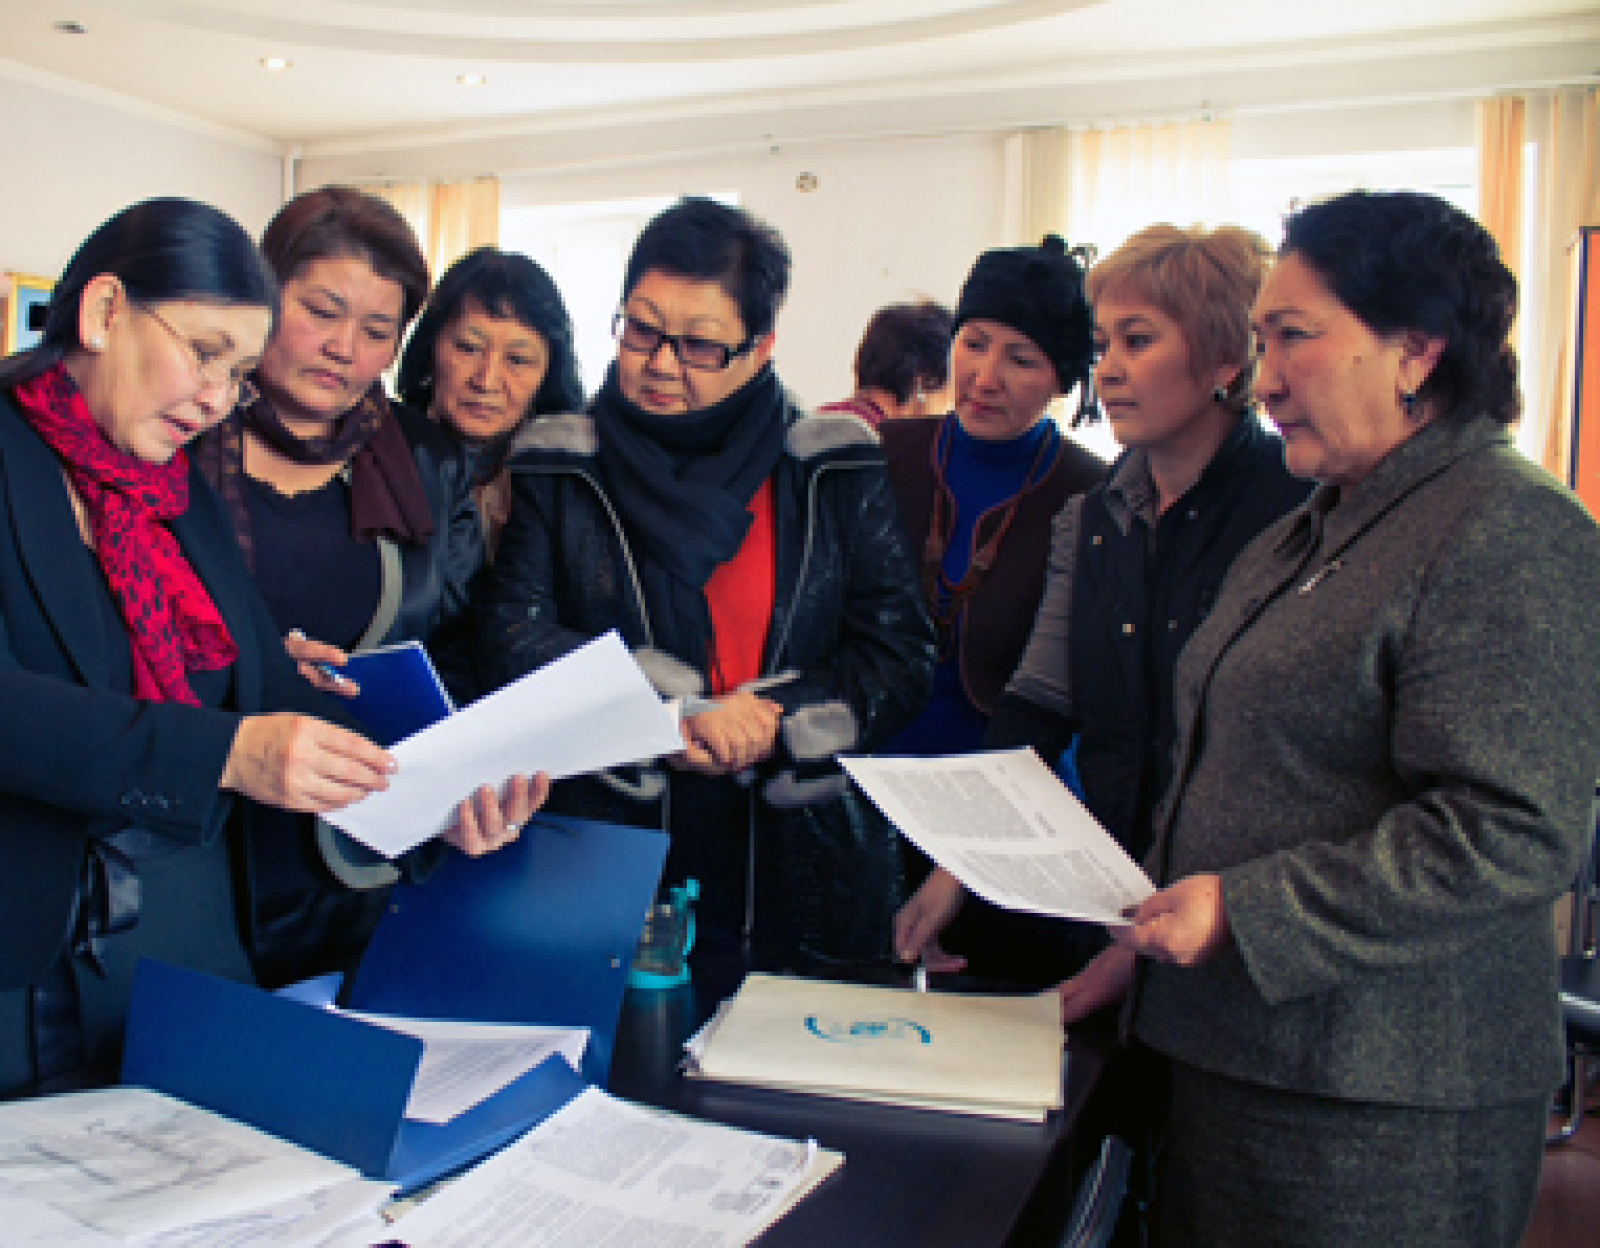 Women’s Discussion Club of Kyrgyzstan Uses Albright Award to Bring Women Together Across Party Lines